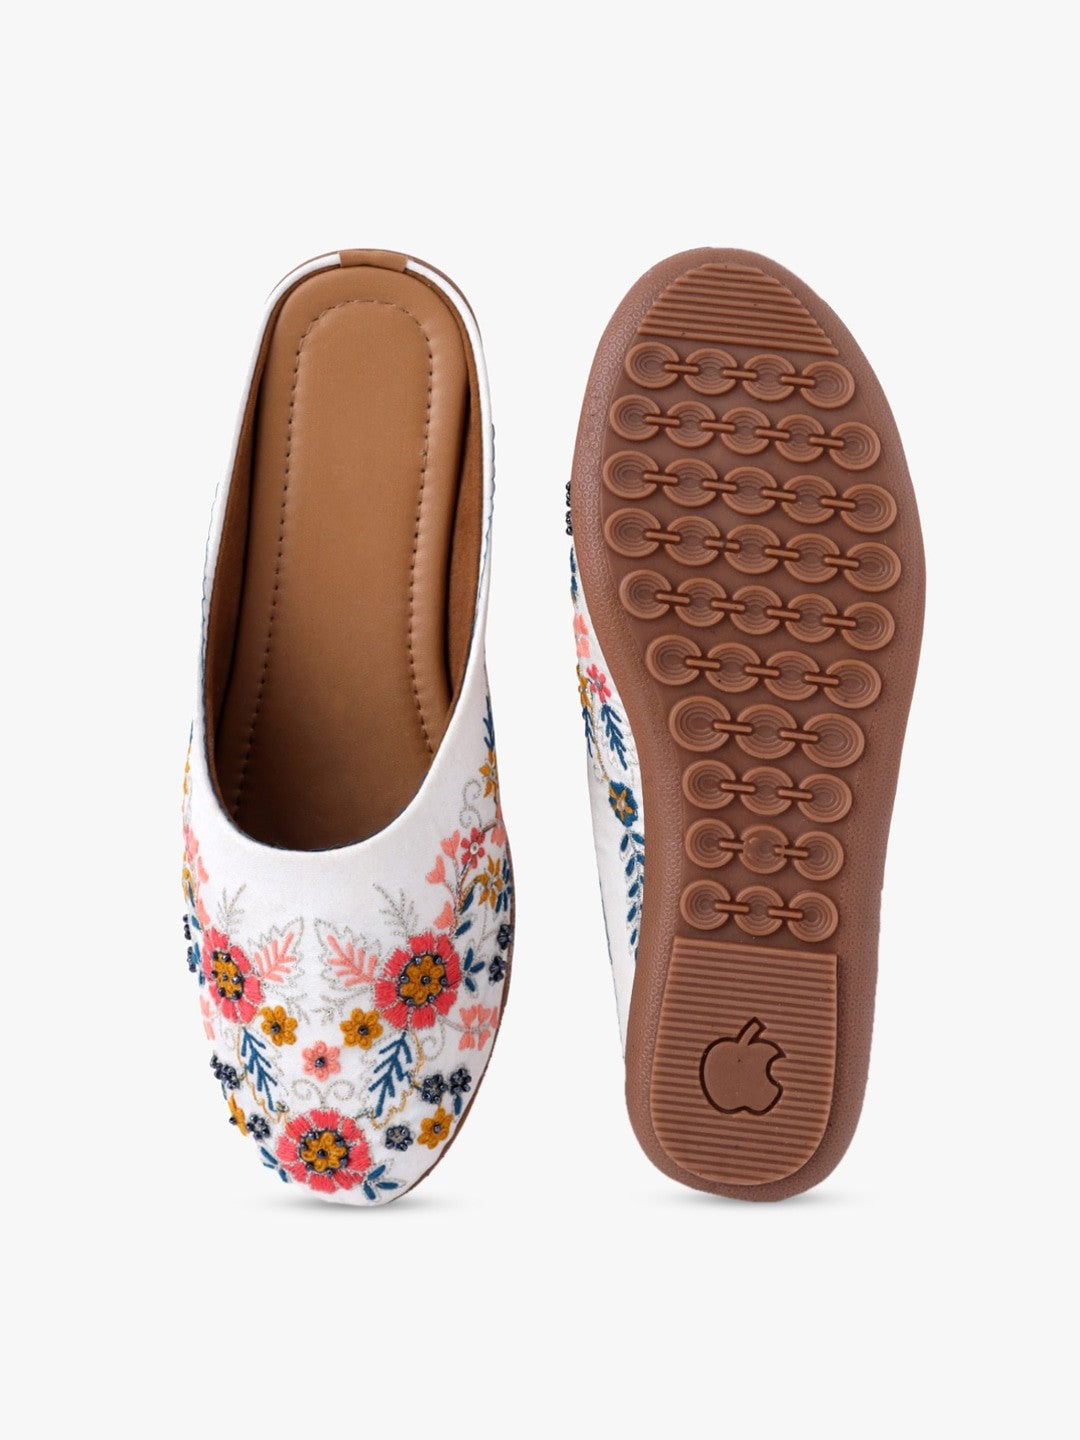 Women White Ethnic Floral Embroidered Canvas Flats Mules